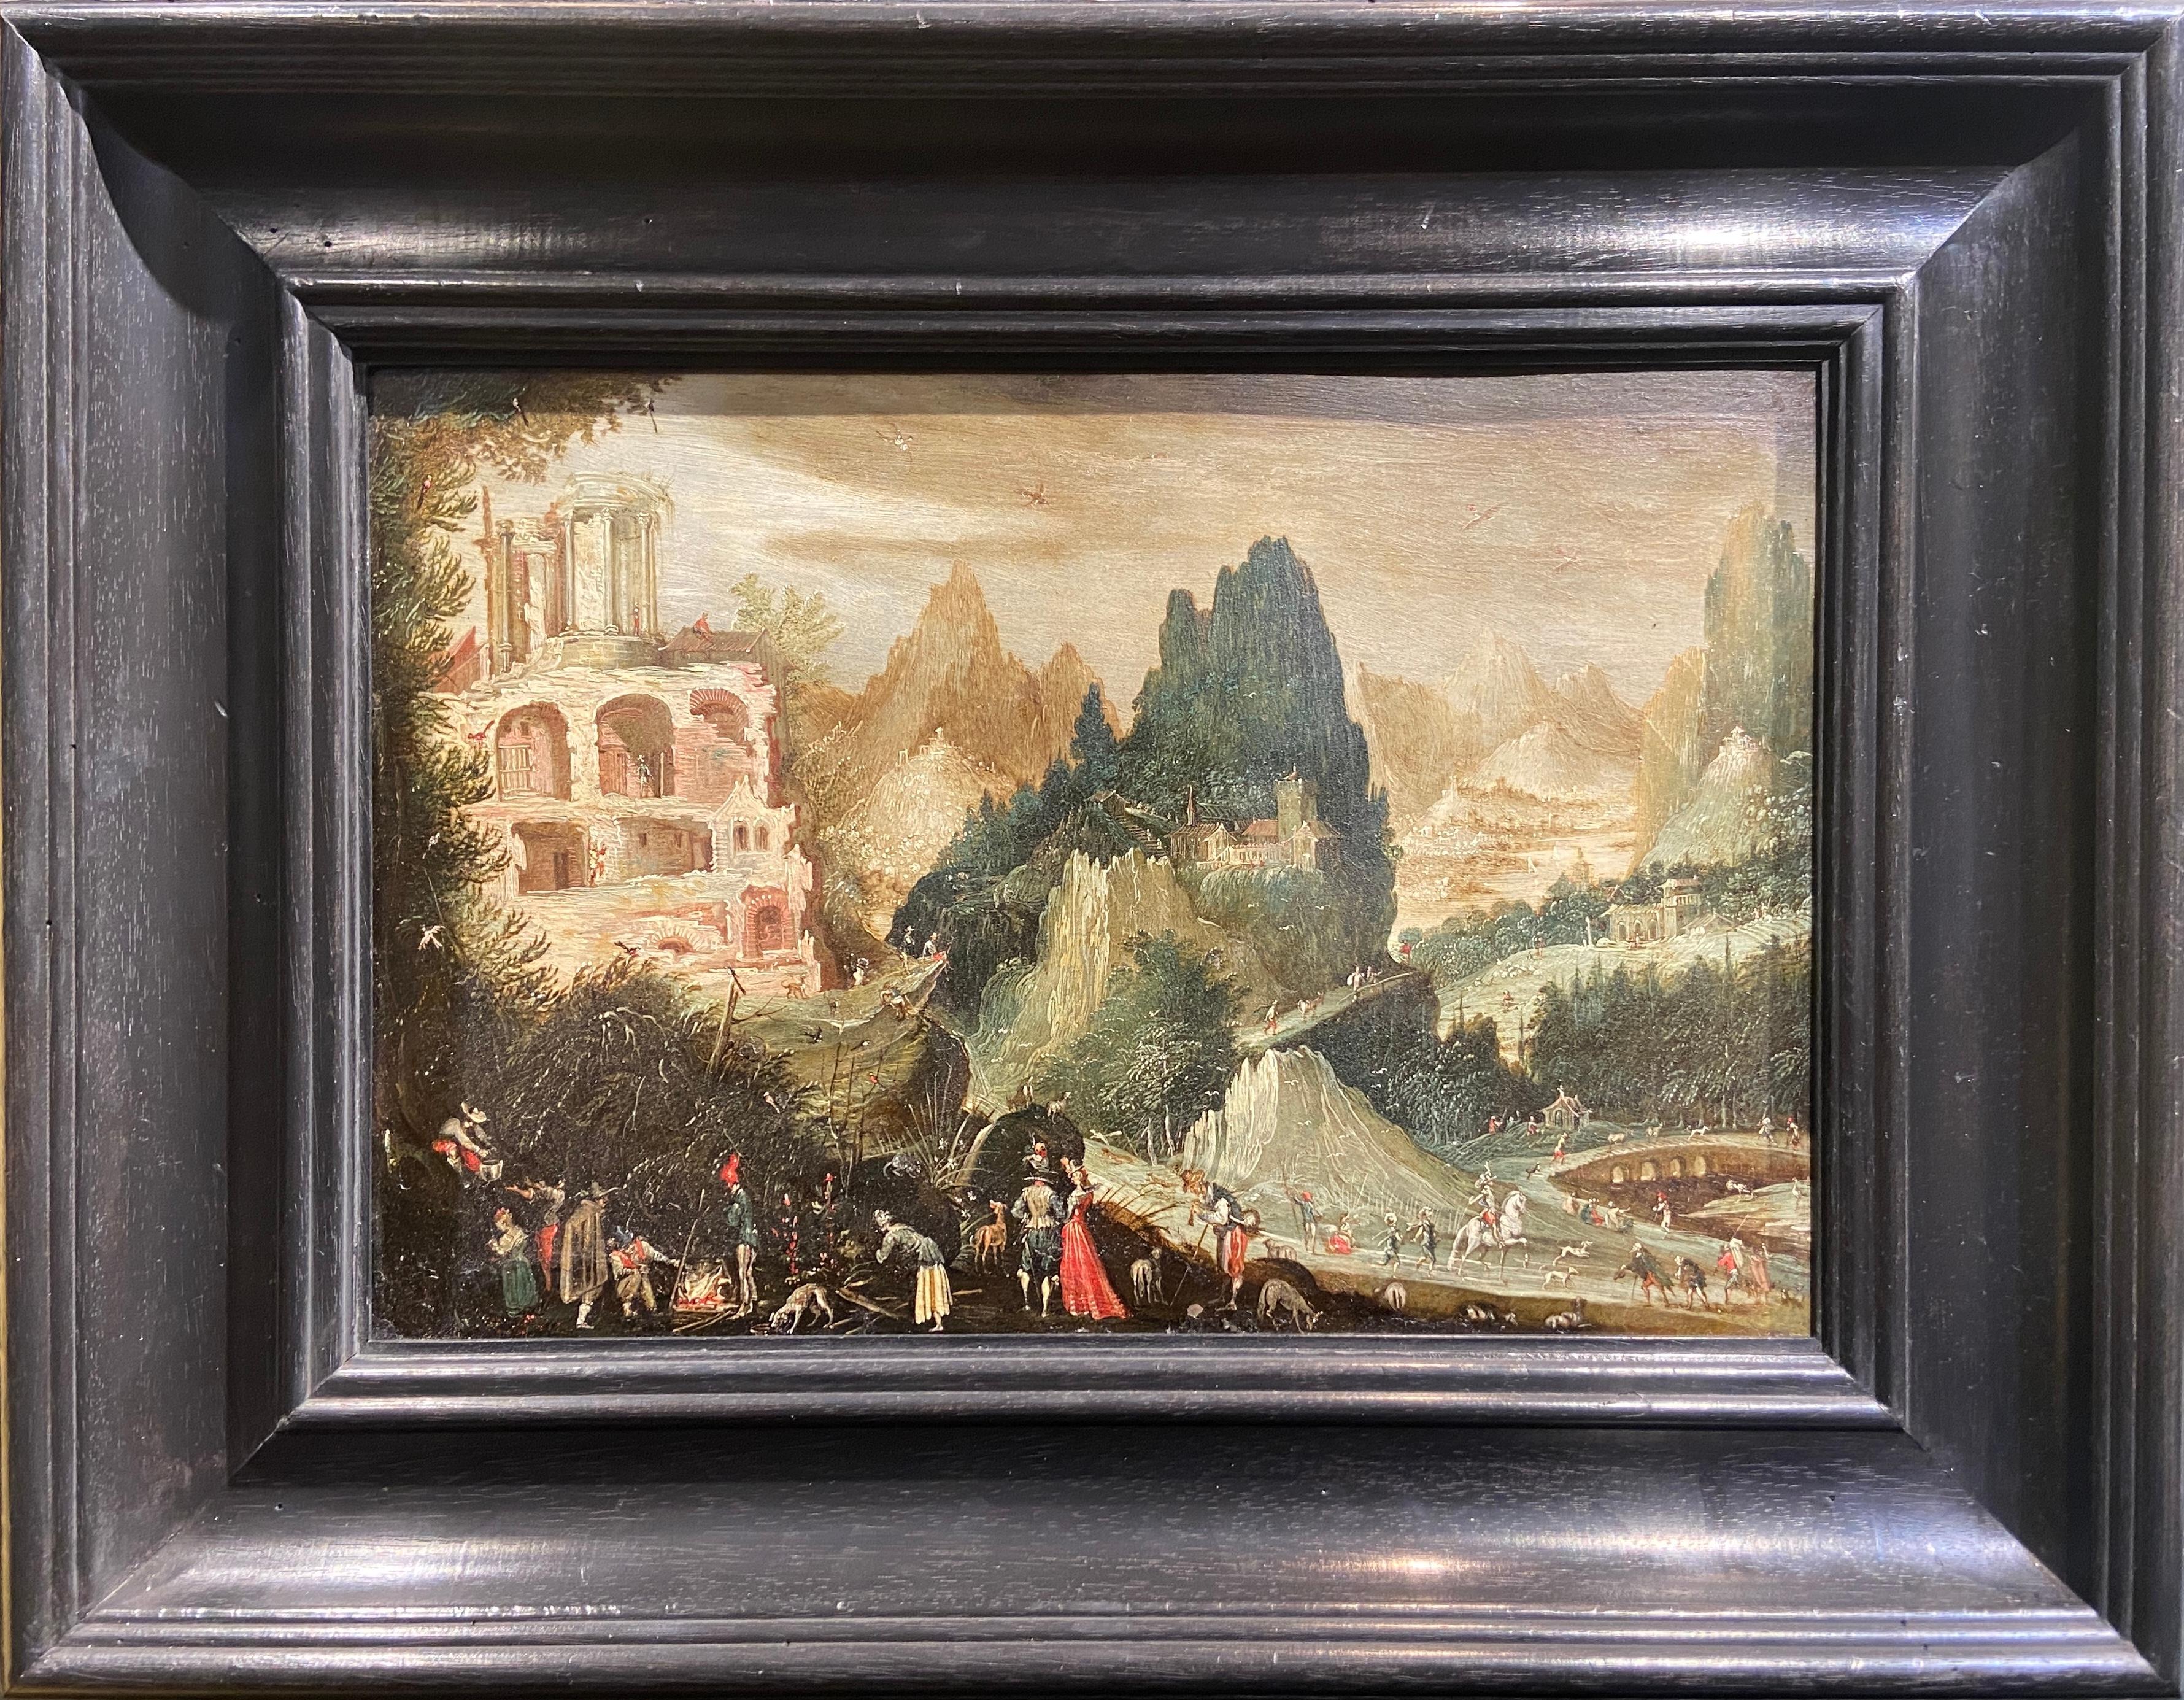 Landscape with Ruins by the Tivoli Falls - Painting by Flemish School, 17th Century